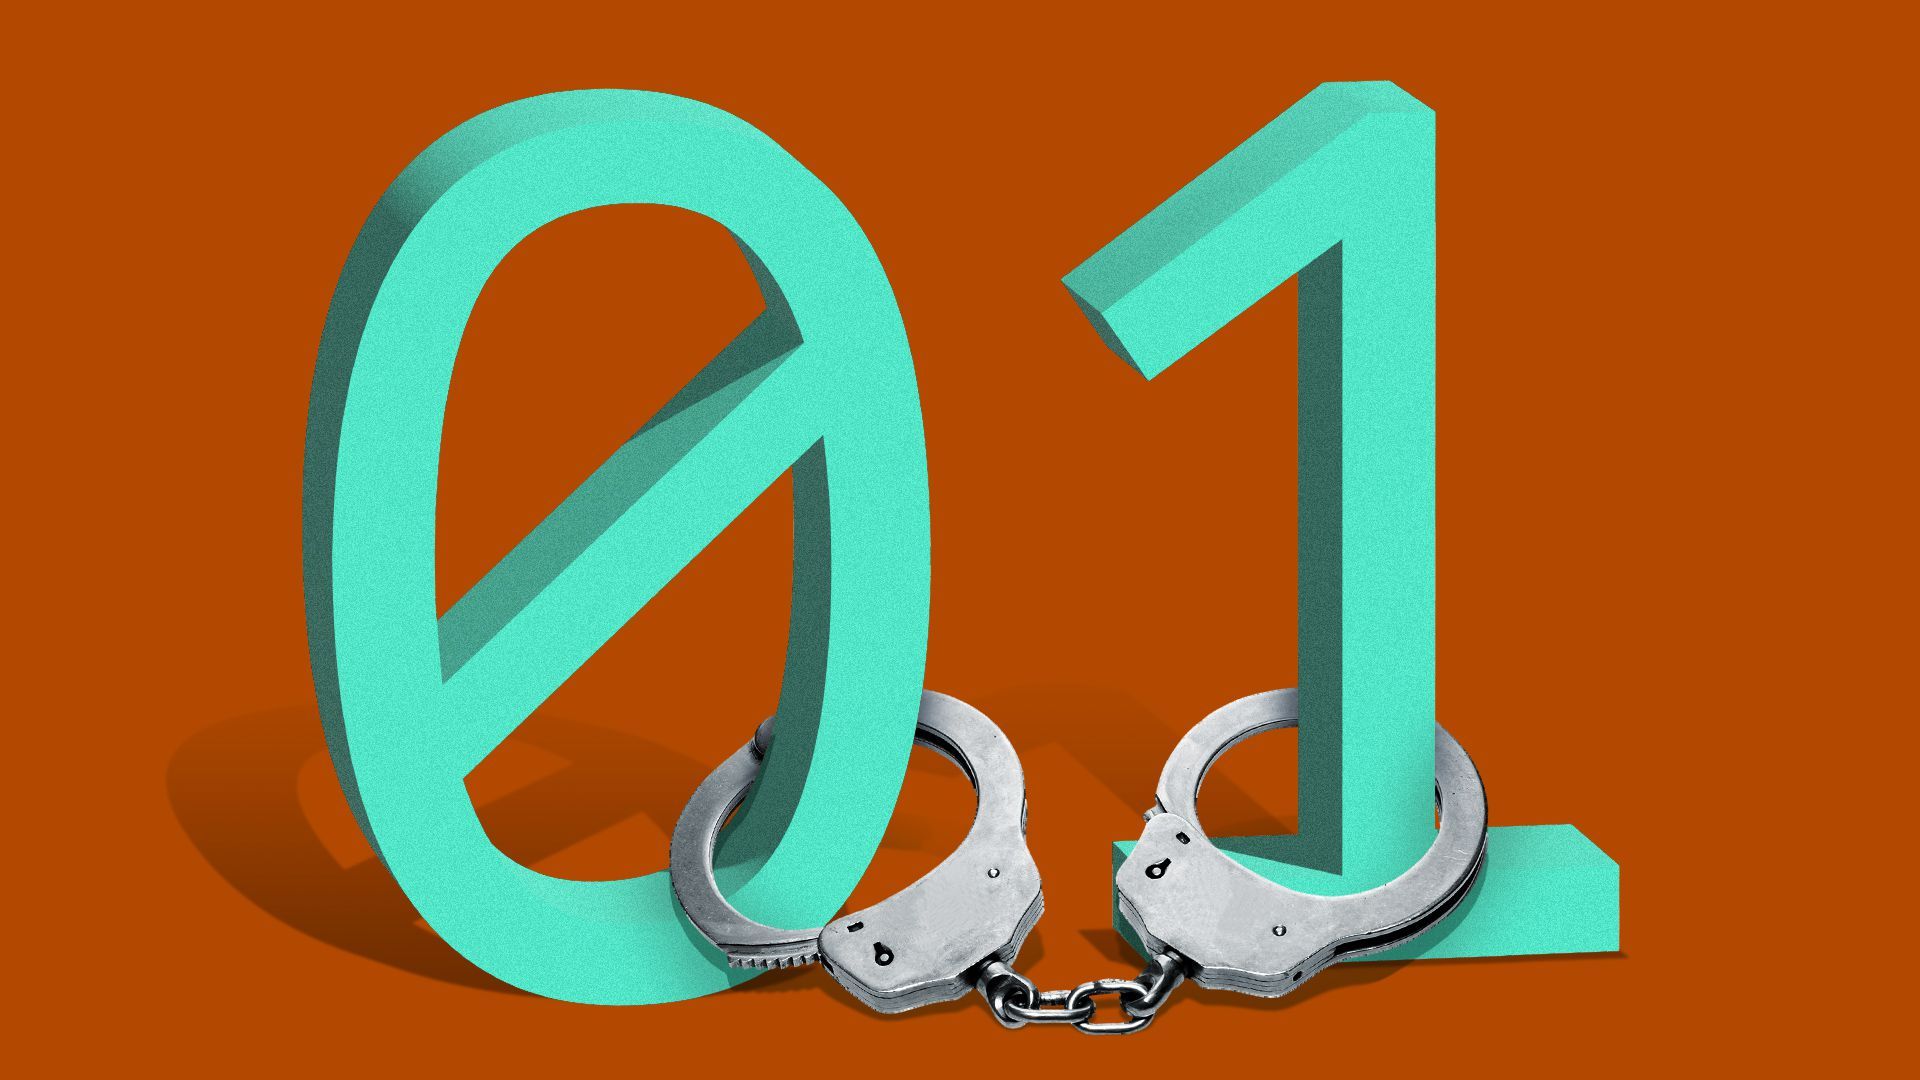 Illustration of a pair of handcuffs on 0 and 1 binary code numbers.